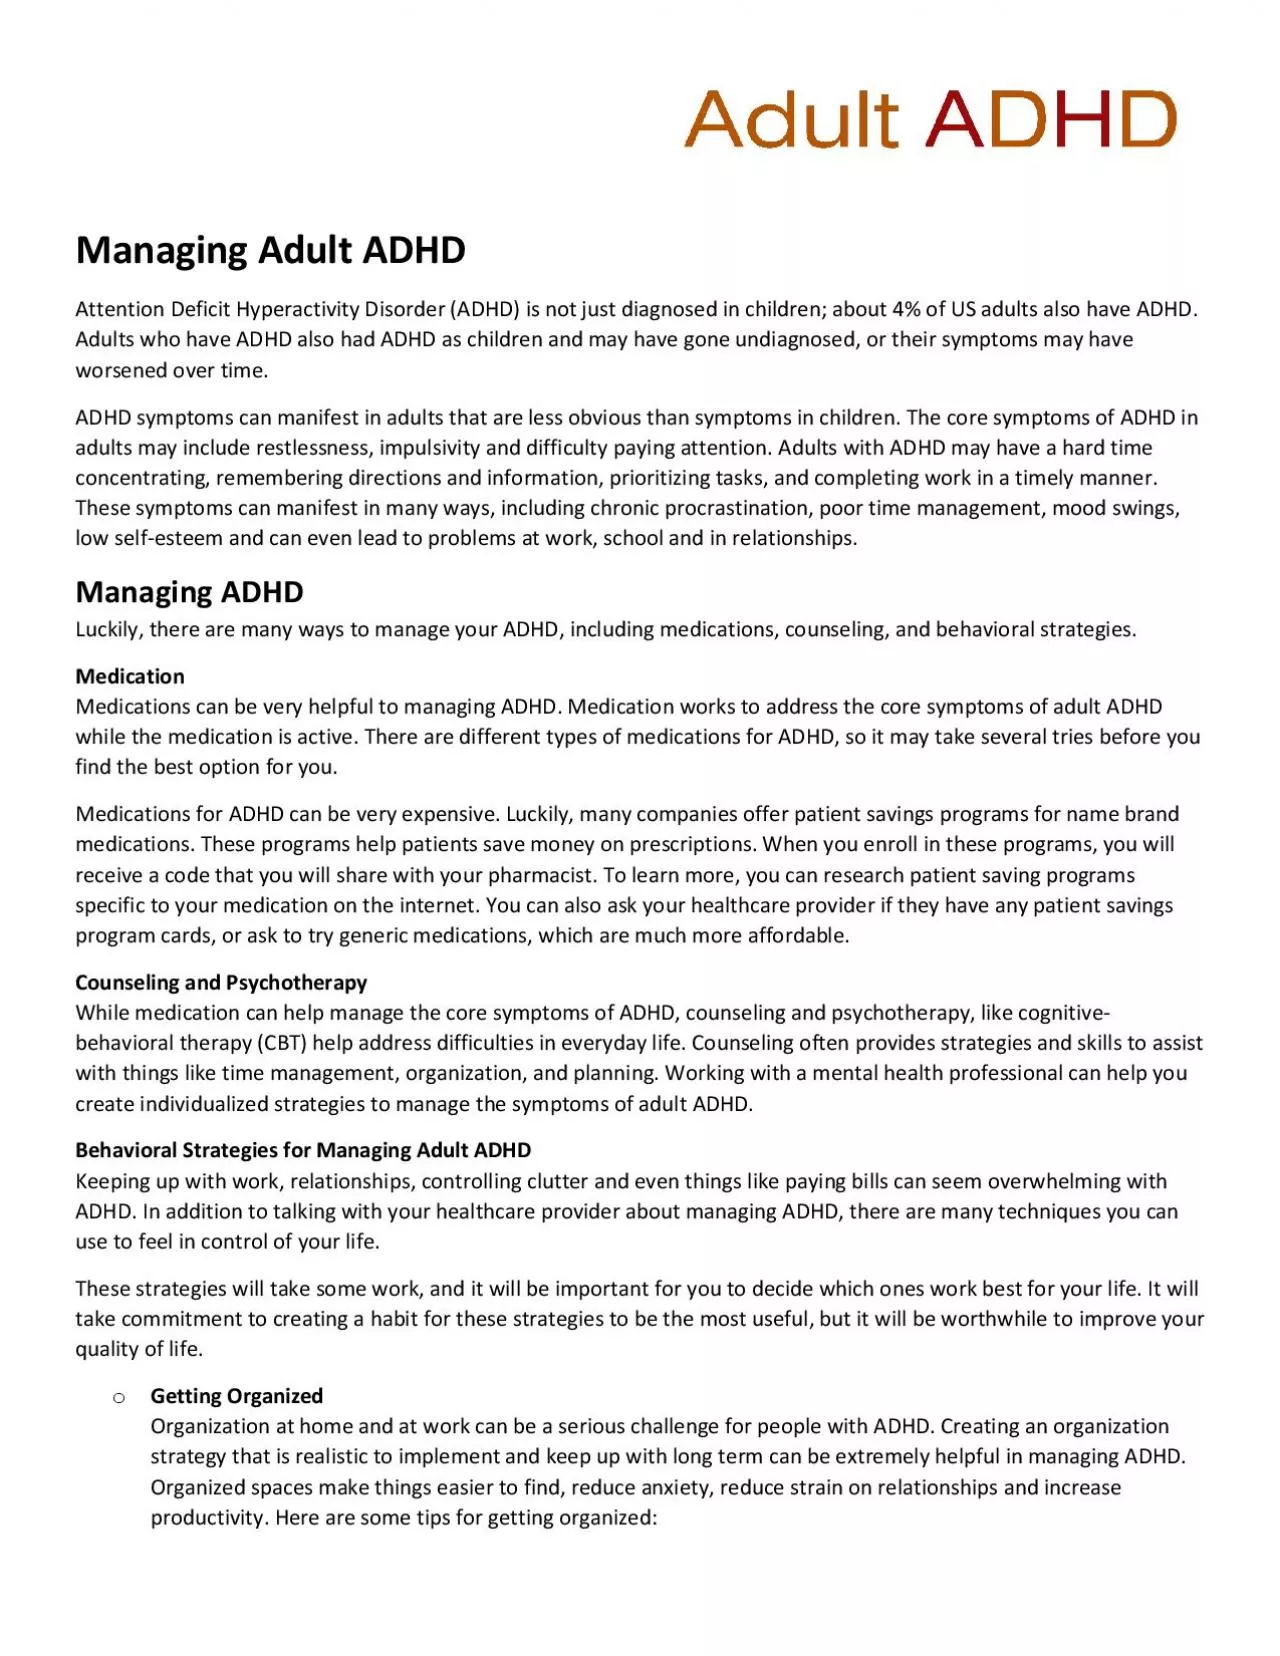 Managing Adult ADHDAttention Deficit Hyperactivity Disorder ADHD is